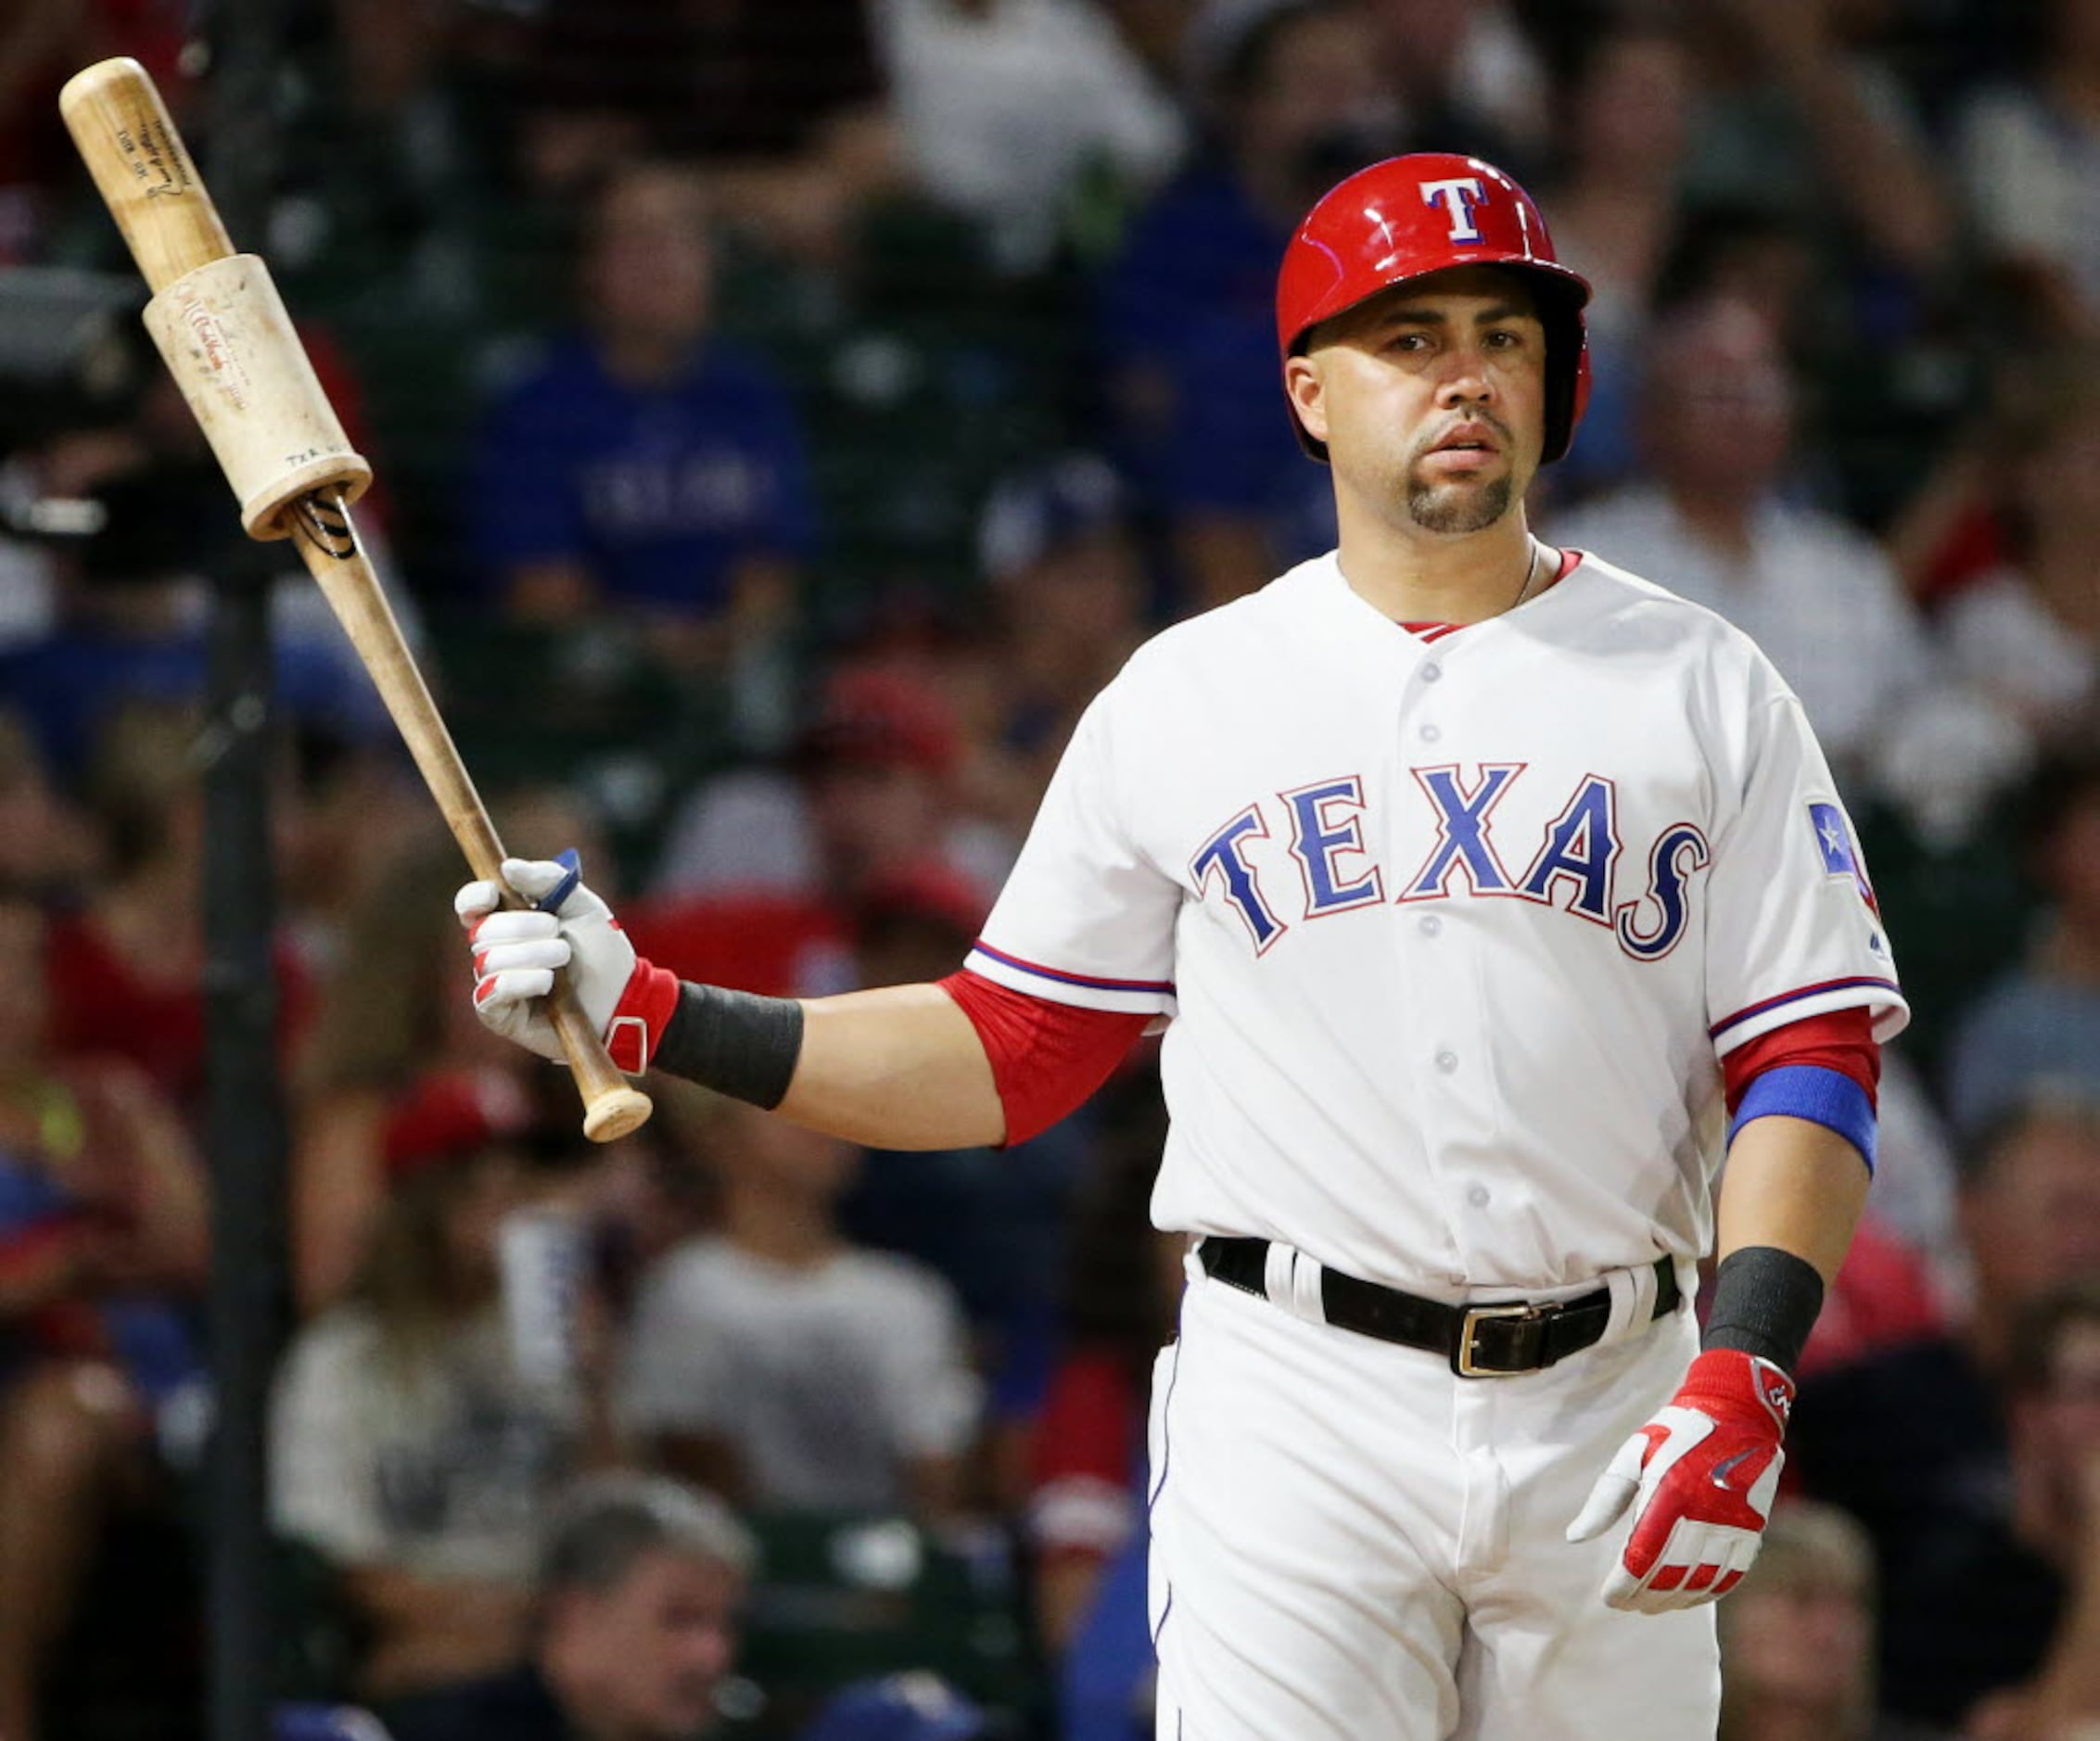 Report: Astros 'hot' for Carlos Beltran, but DH remains on Rangers' radar